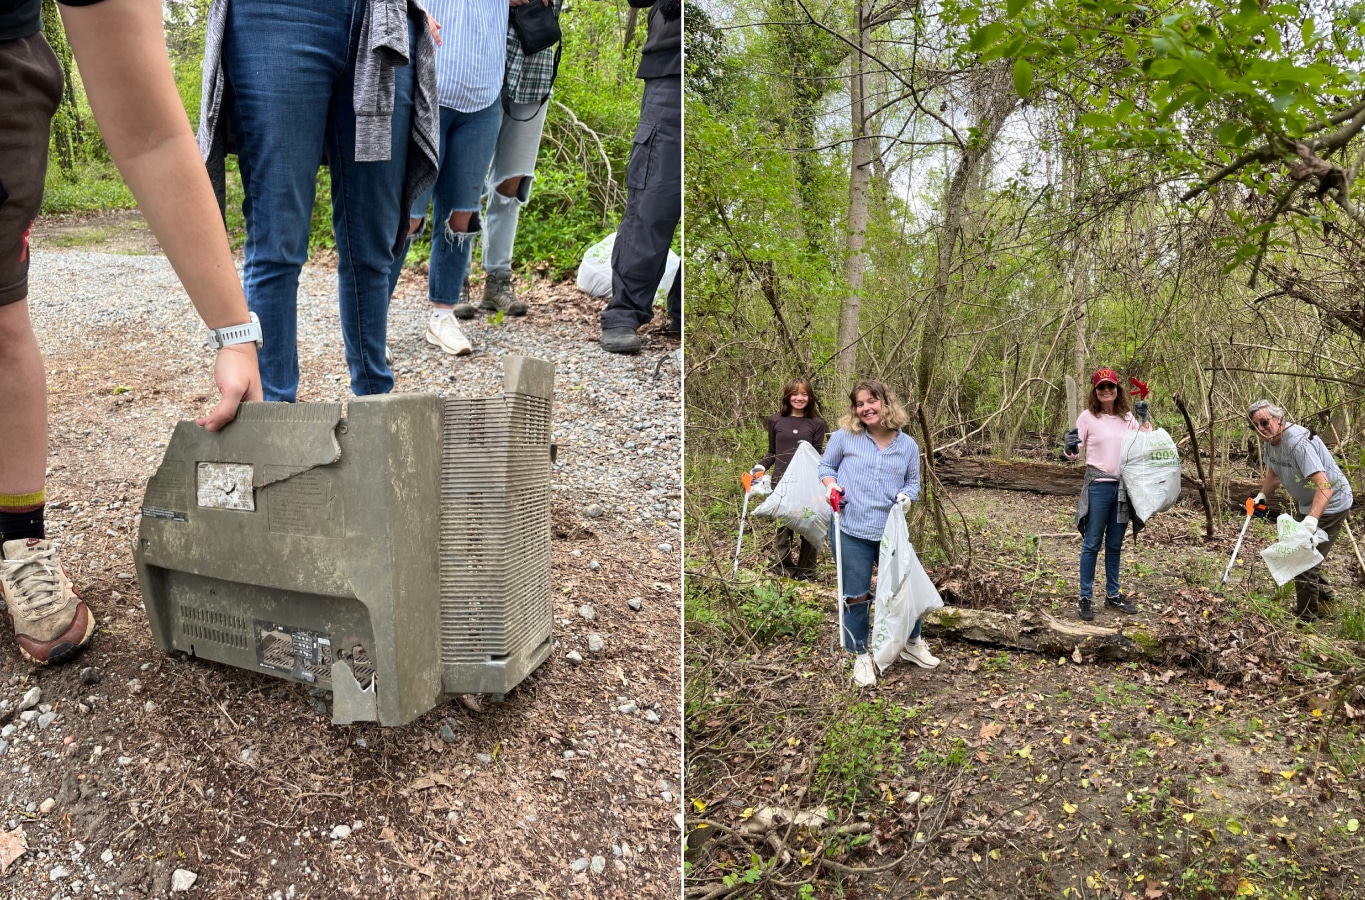 Left, a volunteer shows us the top of a broken plastic desktop casing. Right, participants hold trash bags and trash pickers are picking up trash from a trail in the woods.